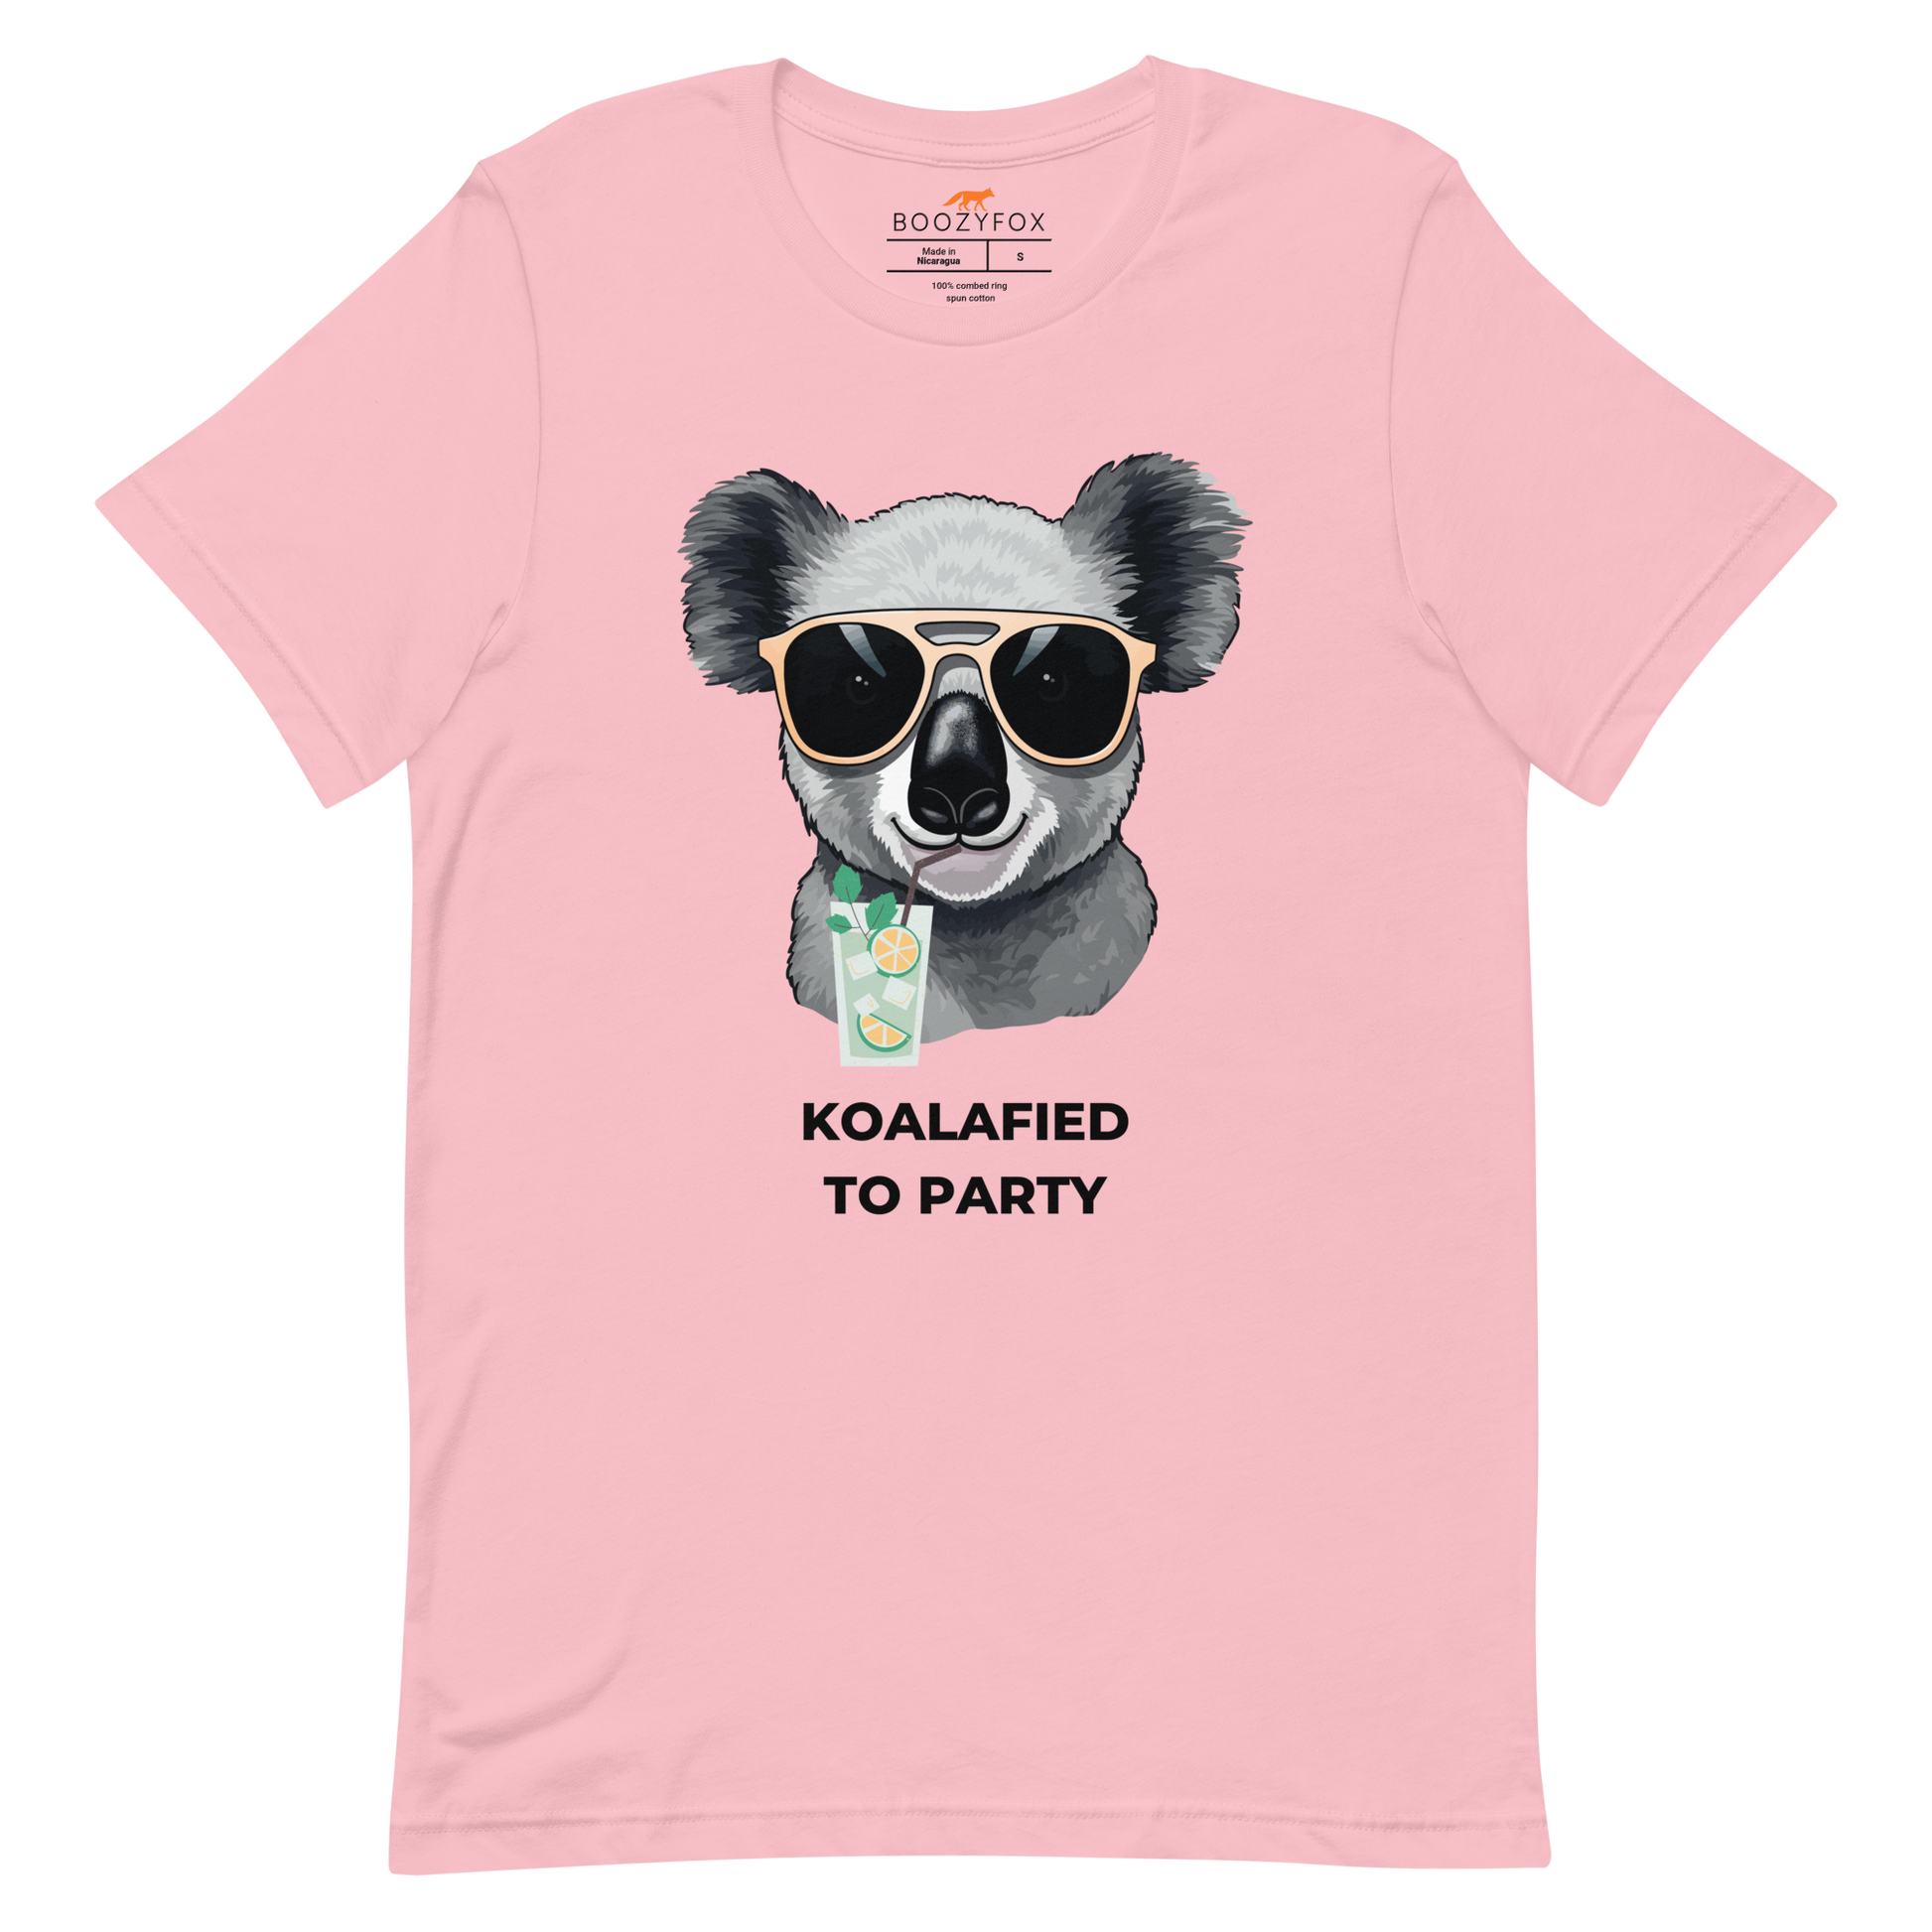 Light Pink Premium Koala Tee featuring an adorable Koalafied To Party graphic on the chest - Funny Graphic Koala Tees - Boozy Fox